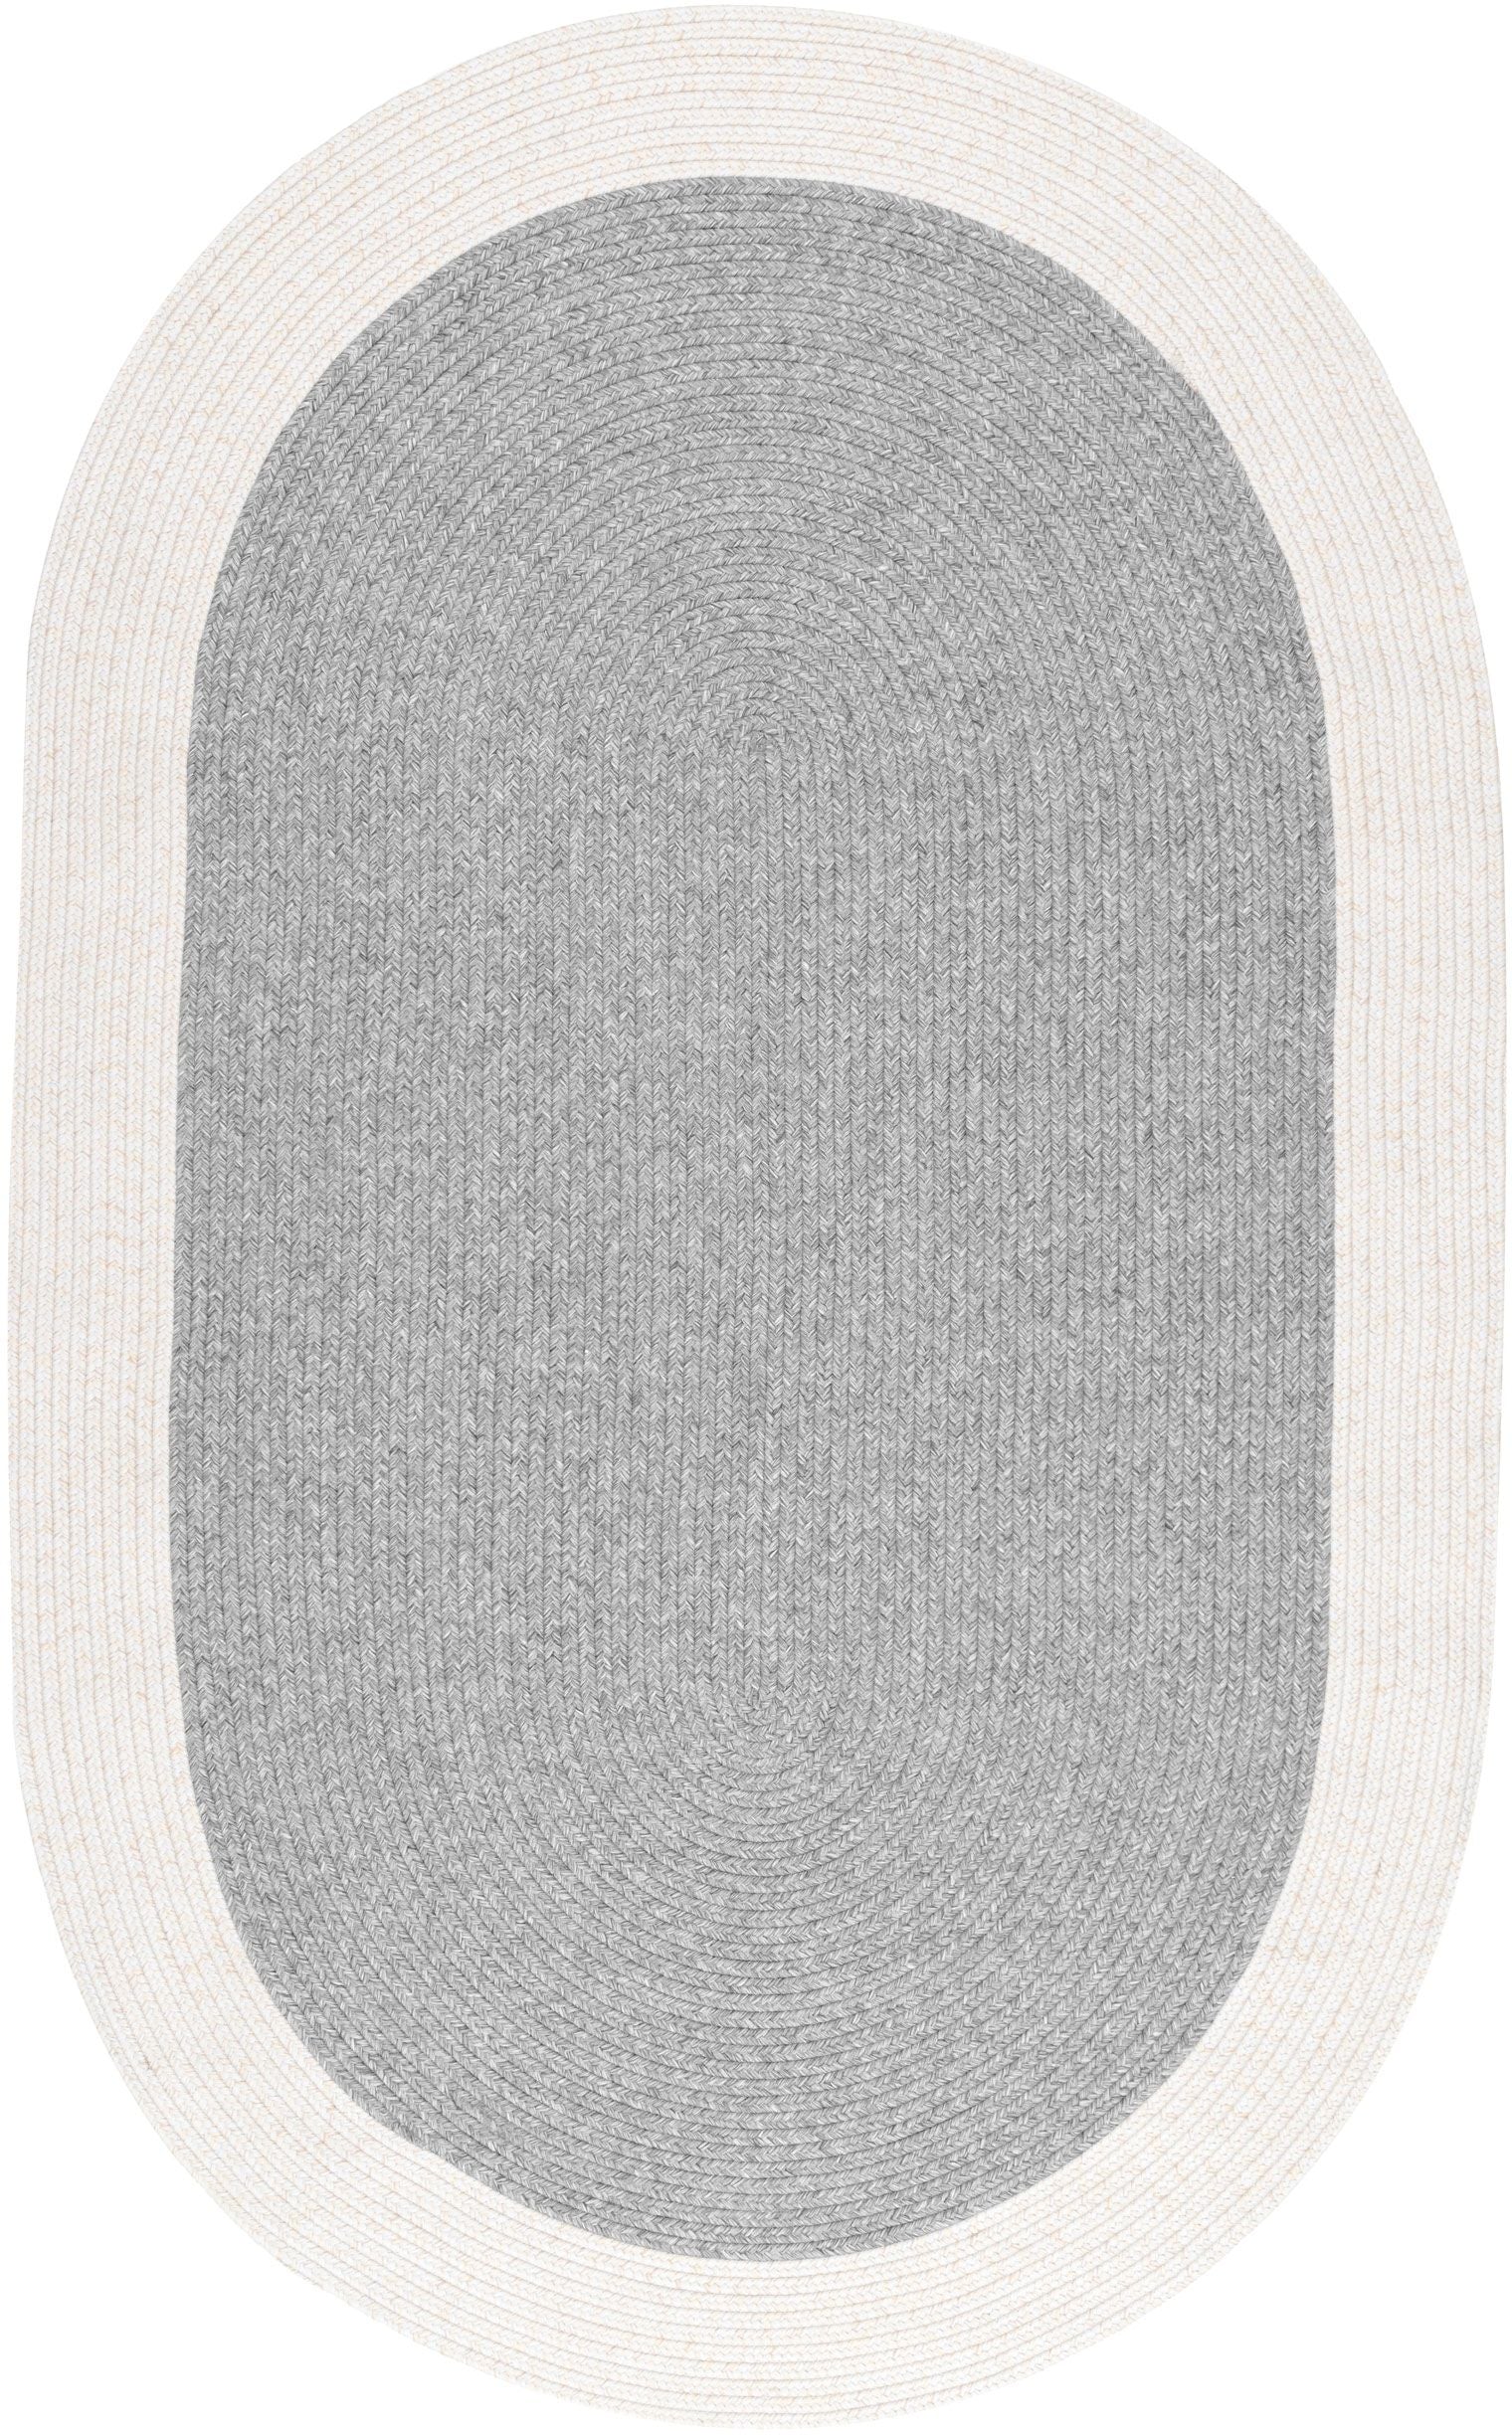 Nuloom Solid Border Delaine Nso1995A Gray Area Rug